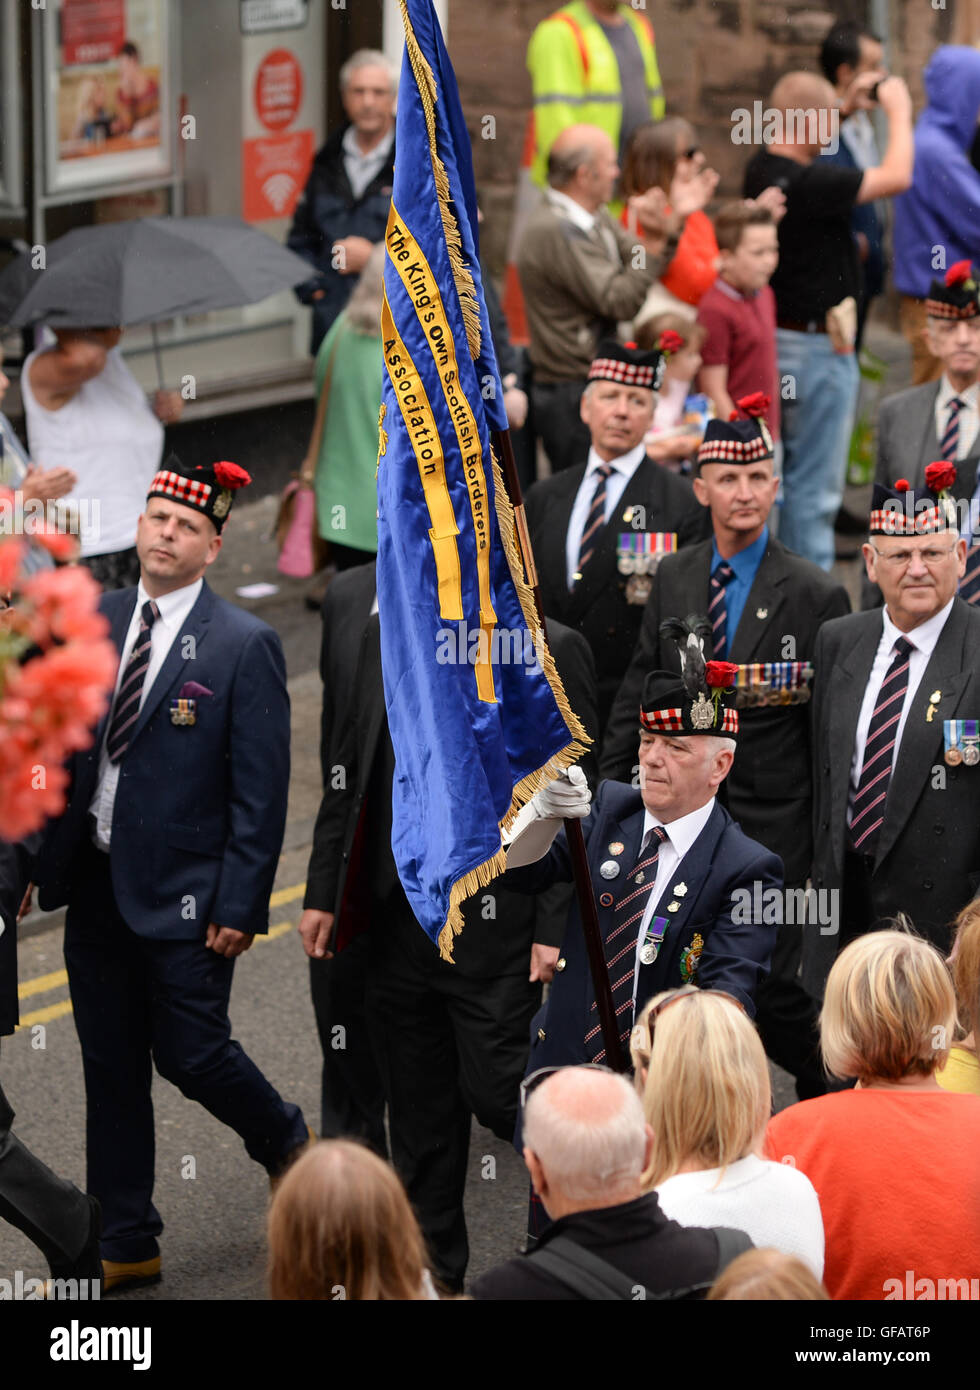 Berwick-on-Tweed, Northumberland, UK. 30 July 2016. The Kings Own Scottish Borderers association mark Minden Day in Berwick upon Tweed, celebrated as their most auspicious Battle Honour. Veterans from the Second World War to veterans of recent conflicts were on parade. Credit:  Jim Gibson/Alamy Live News Stock Photo